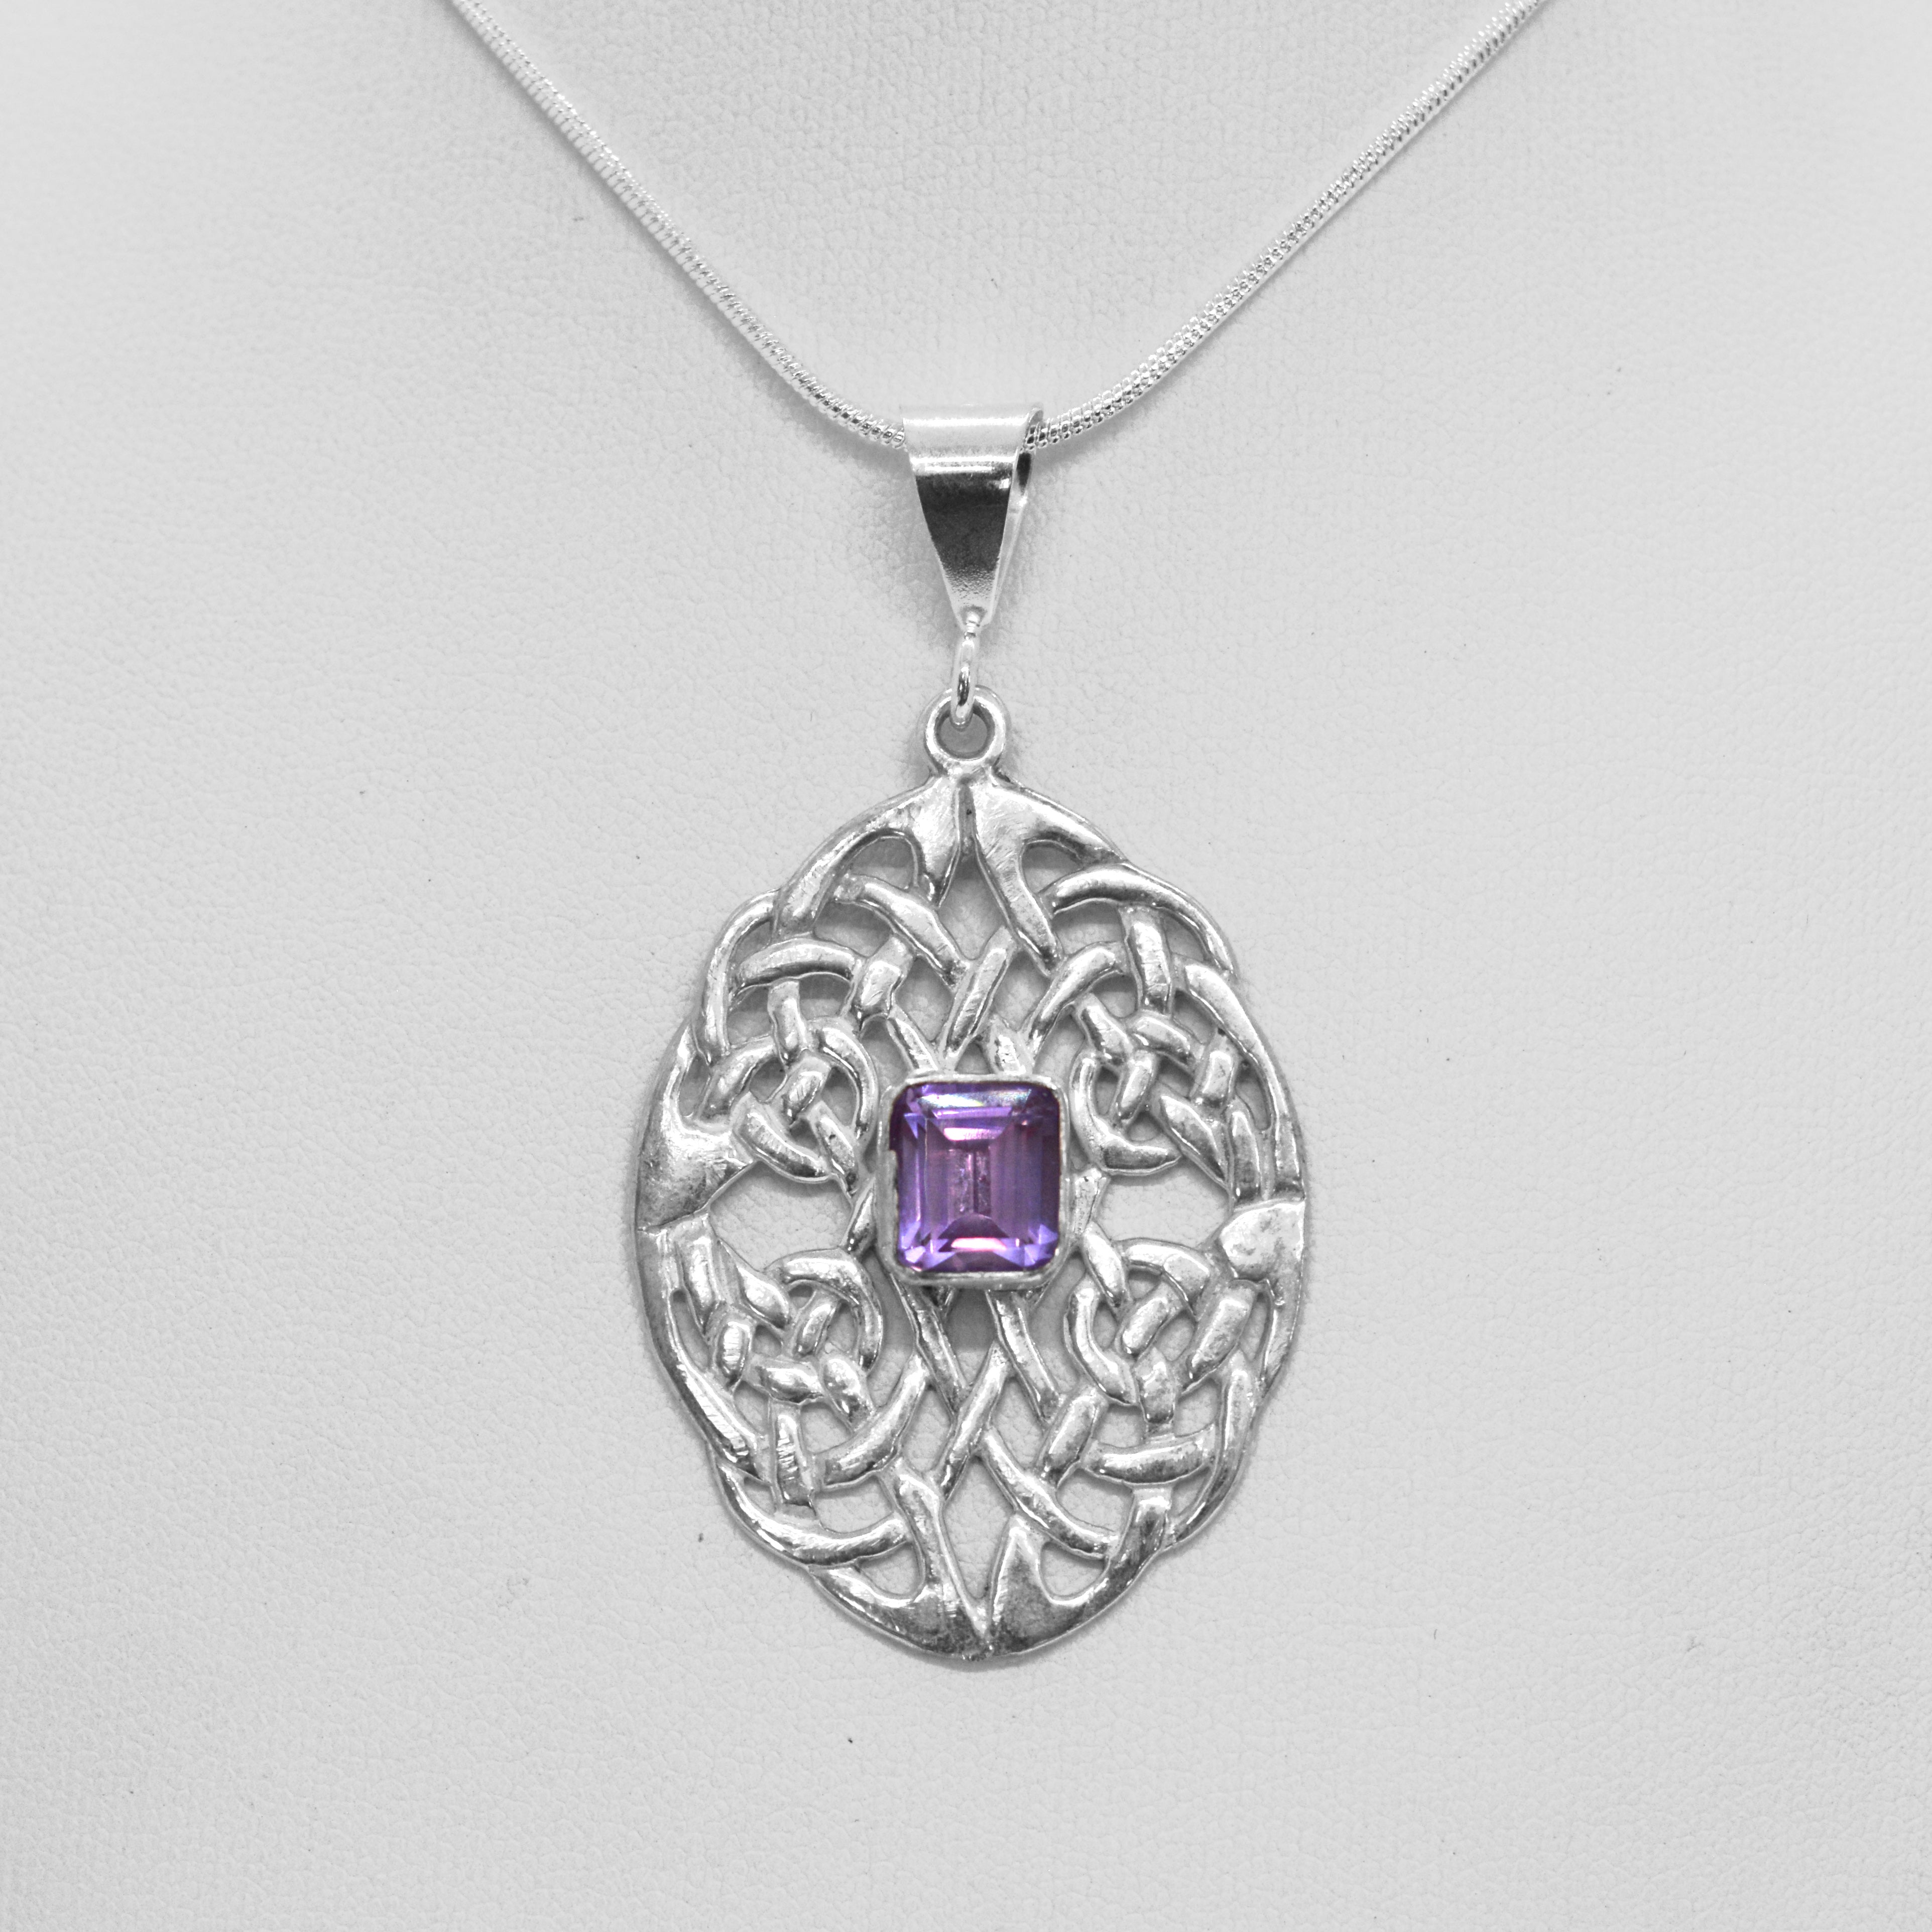 Celtic Knot Pendant with Amethyst